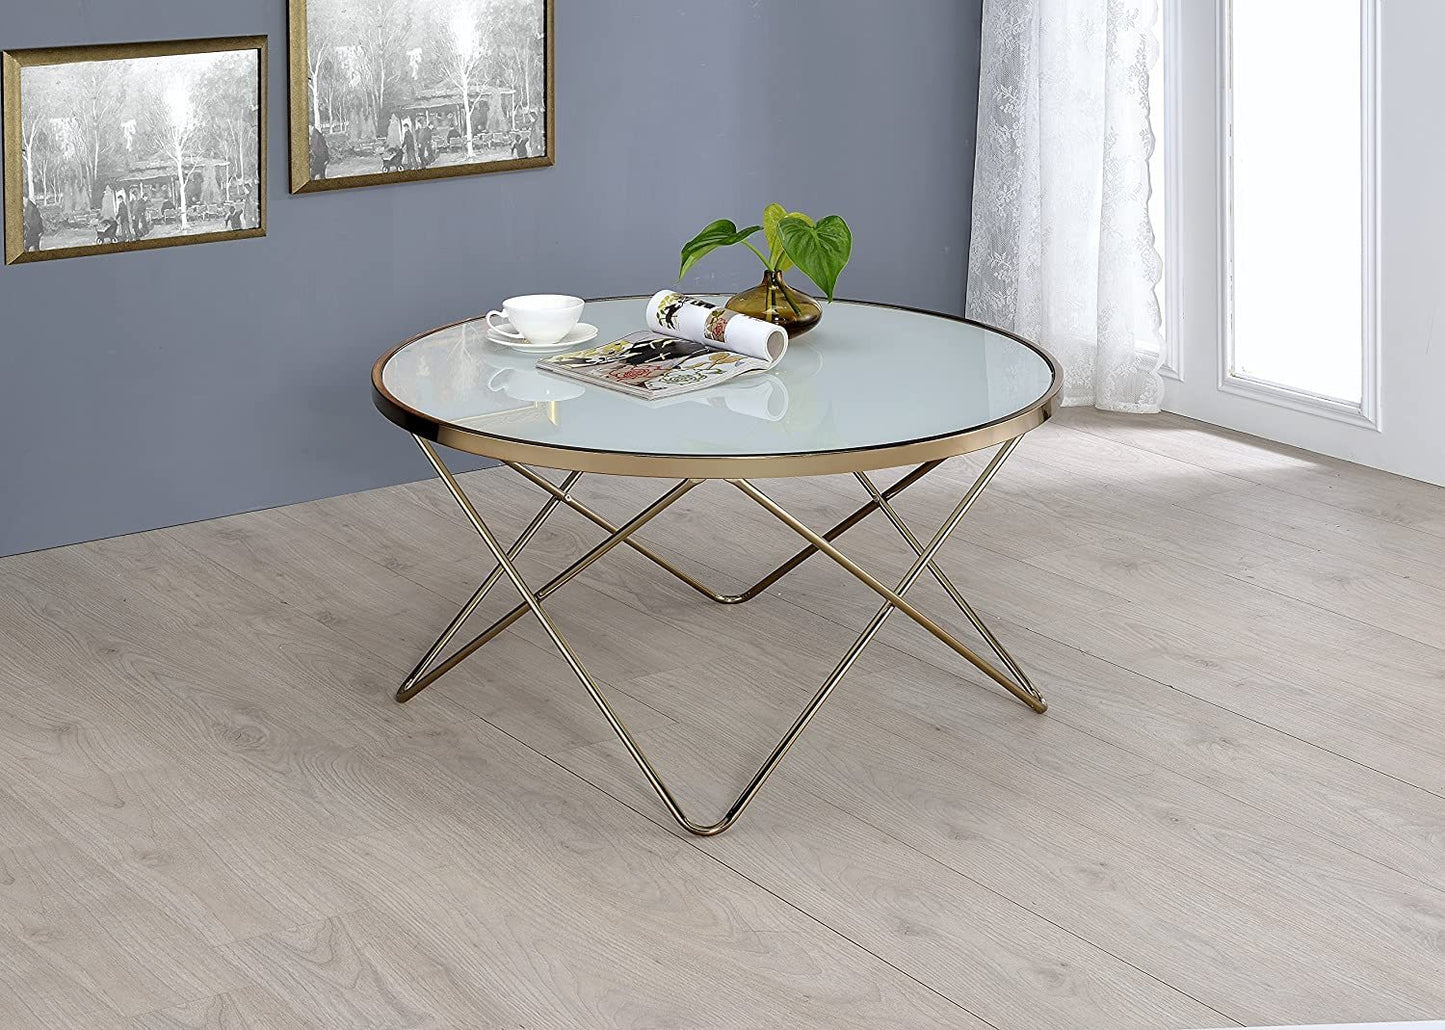 Champagne & Frosted Glass Valora Coffee Table with Elegant Design